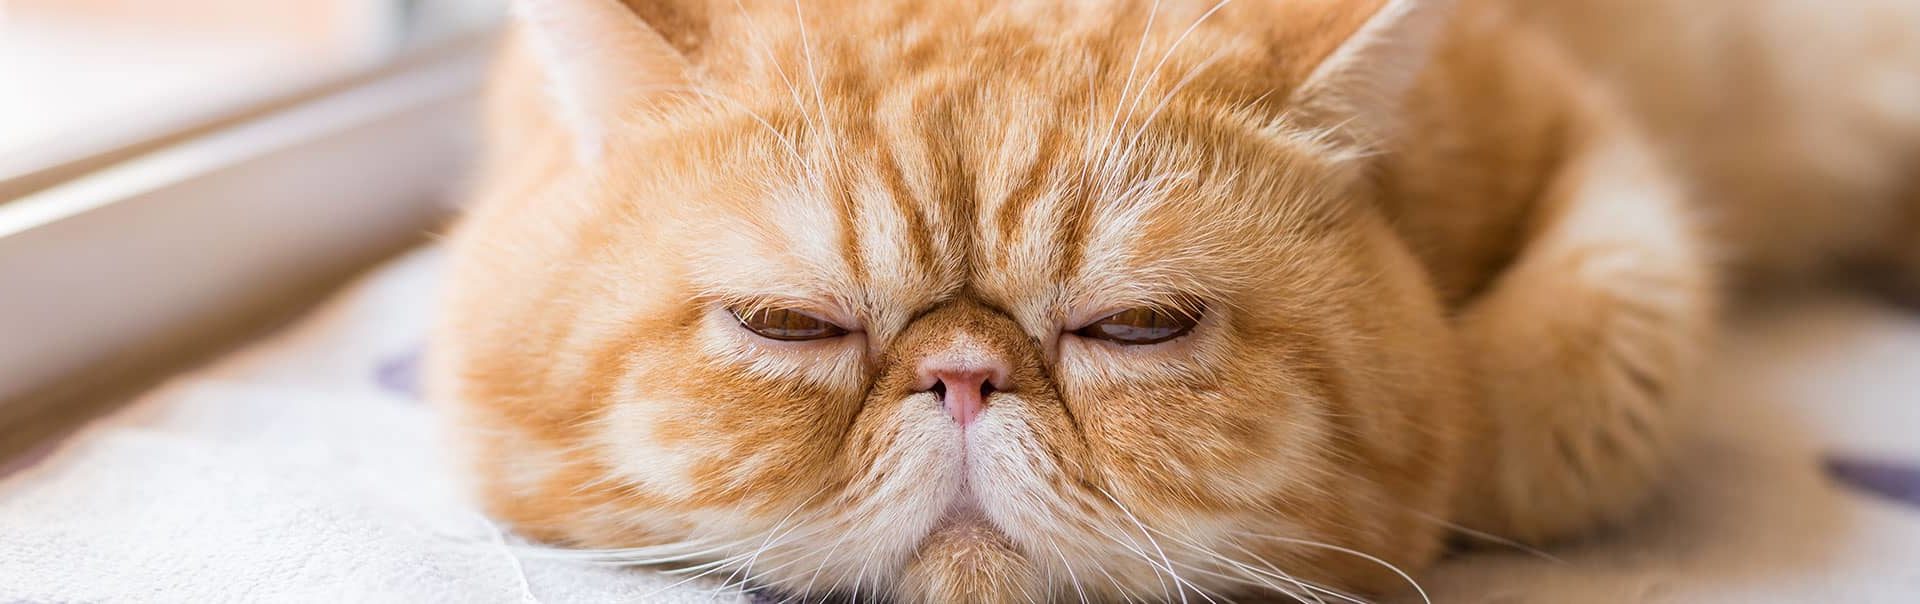 Ginger cat makes snarl-looking face to the camera